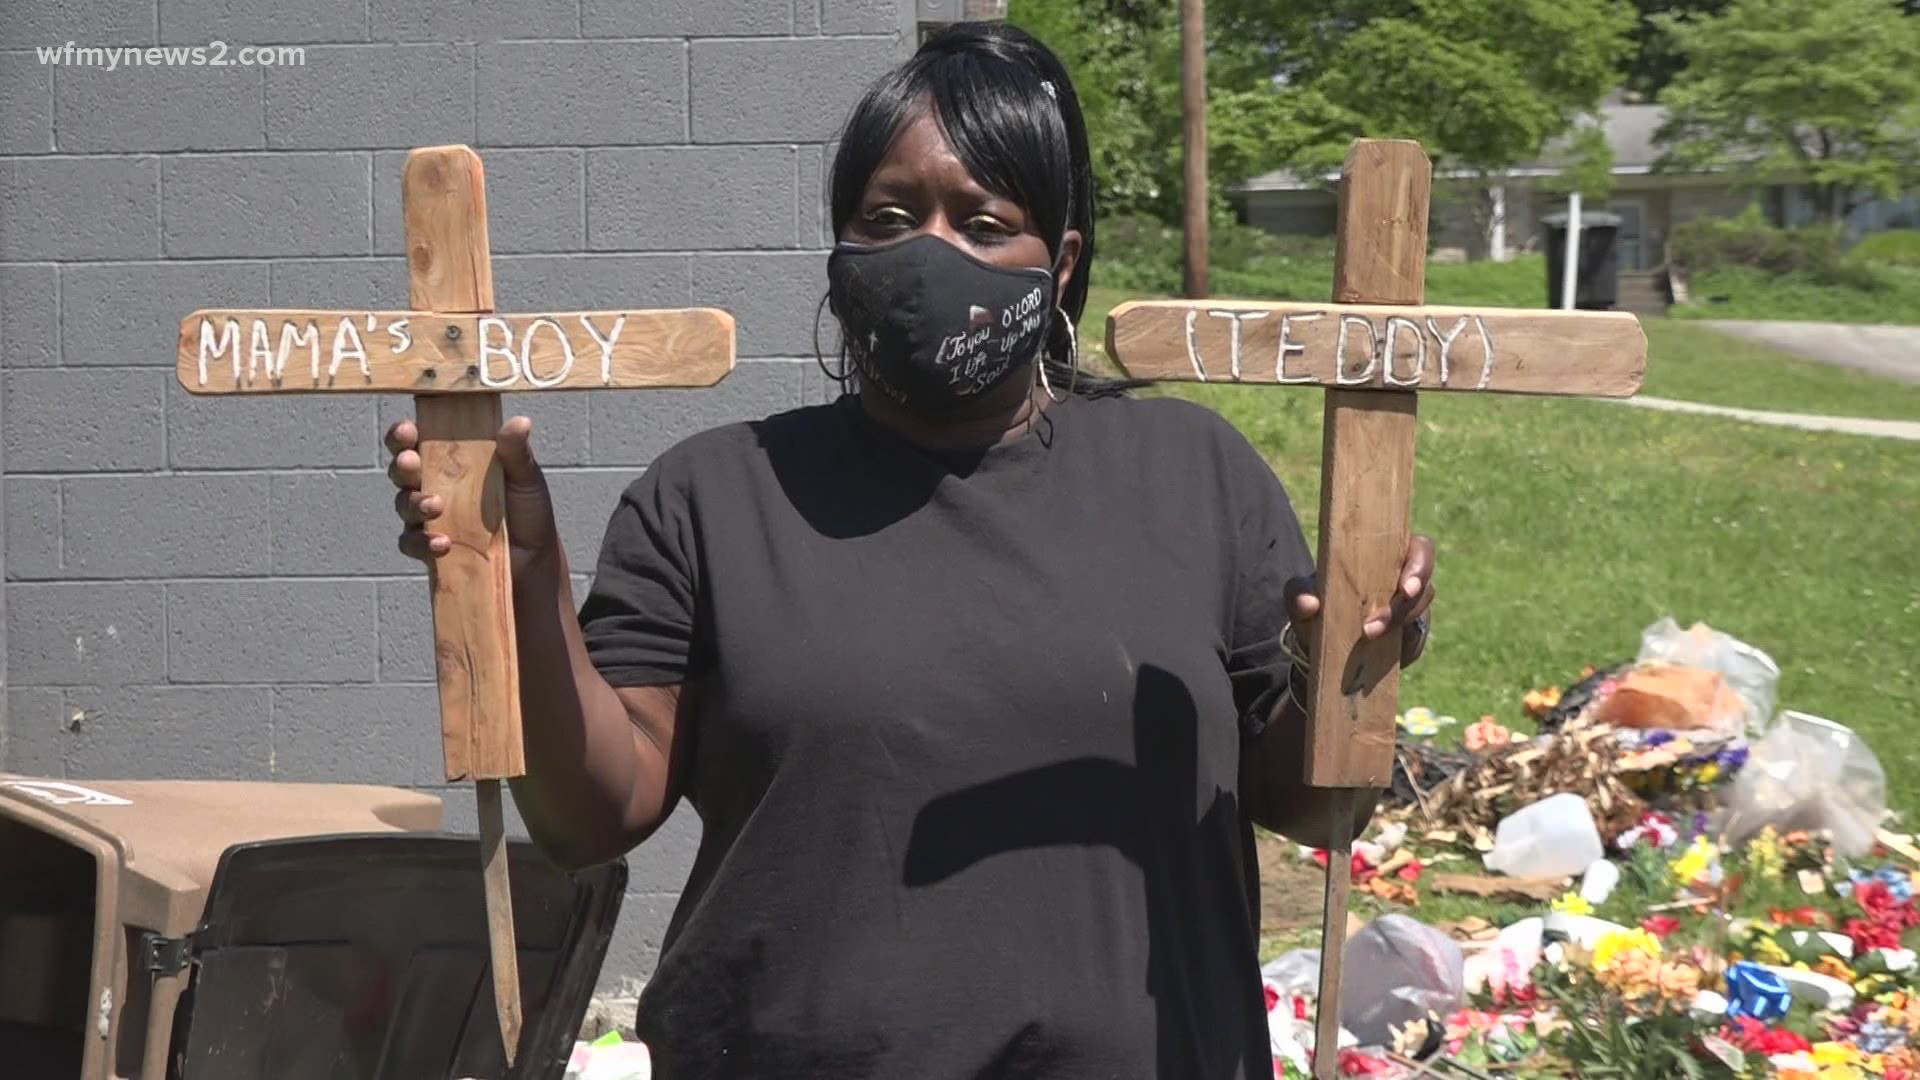 It's the first Mother's Day Liz Collins is spending without her son. She says the decorations she left at her sons grave were all thrown in the trash without warning